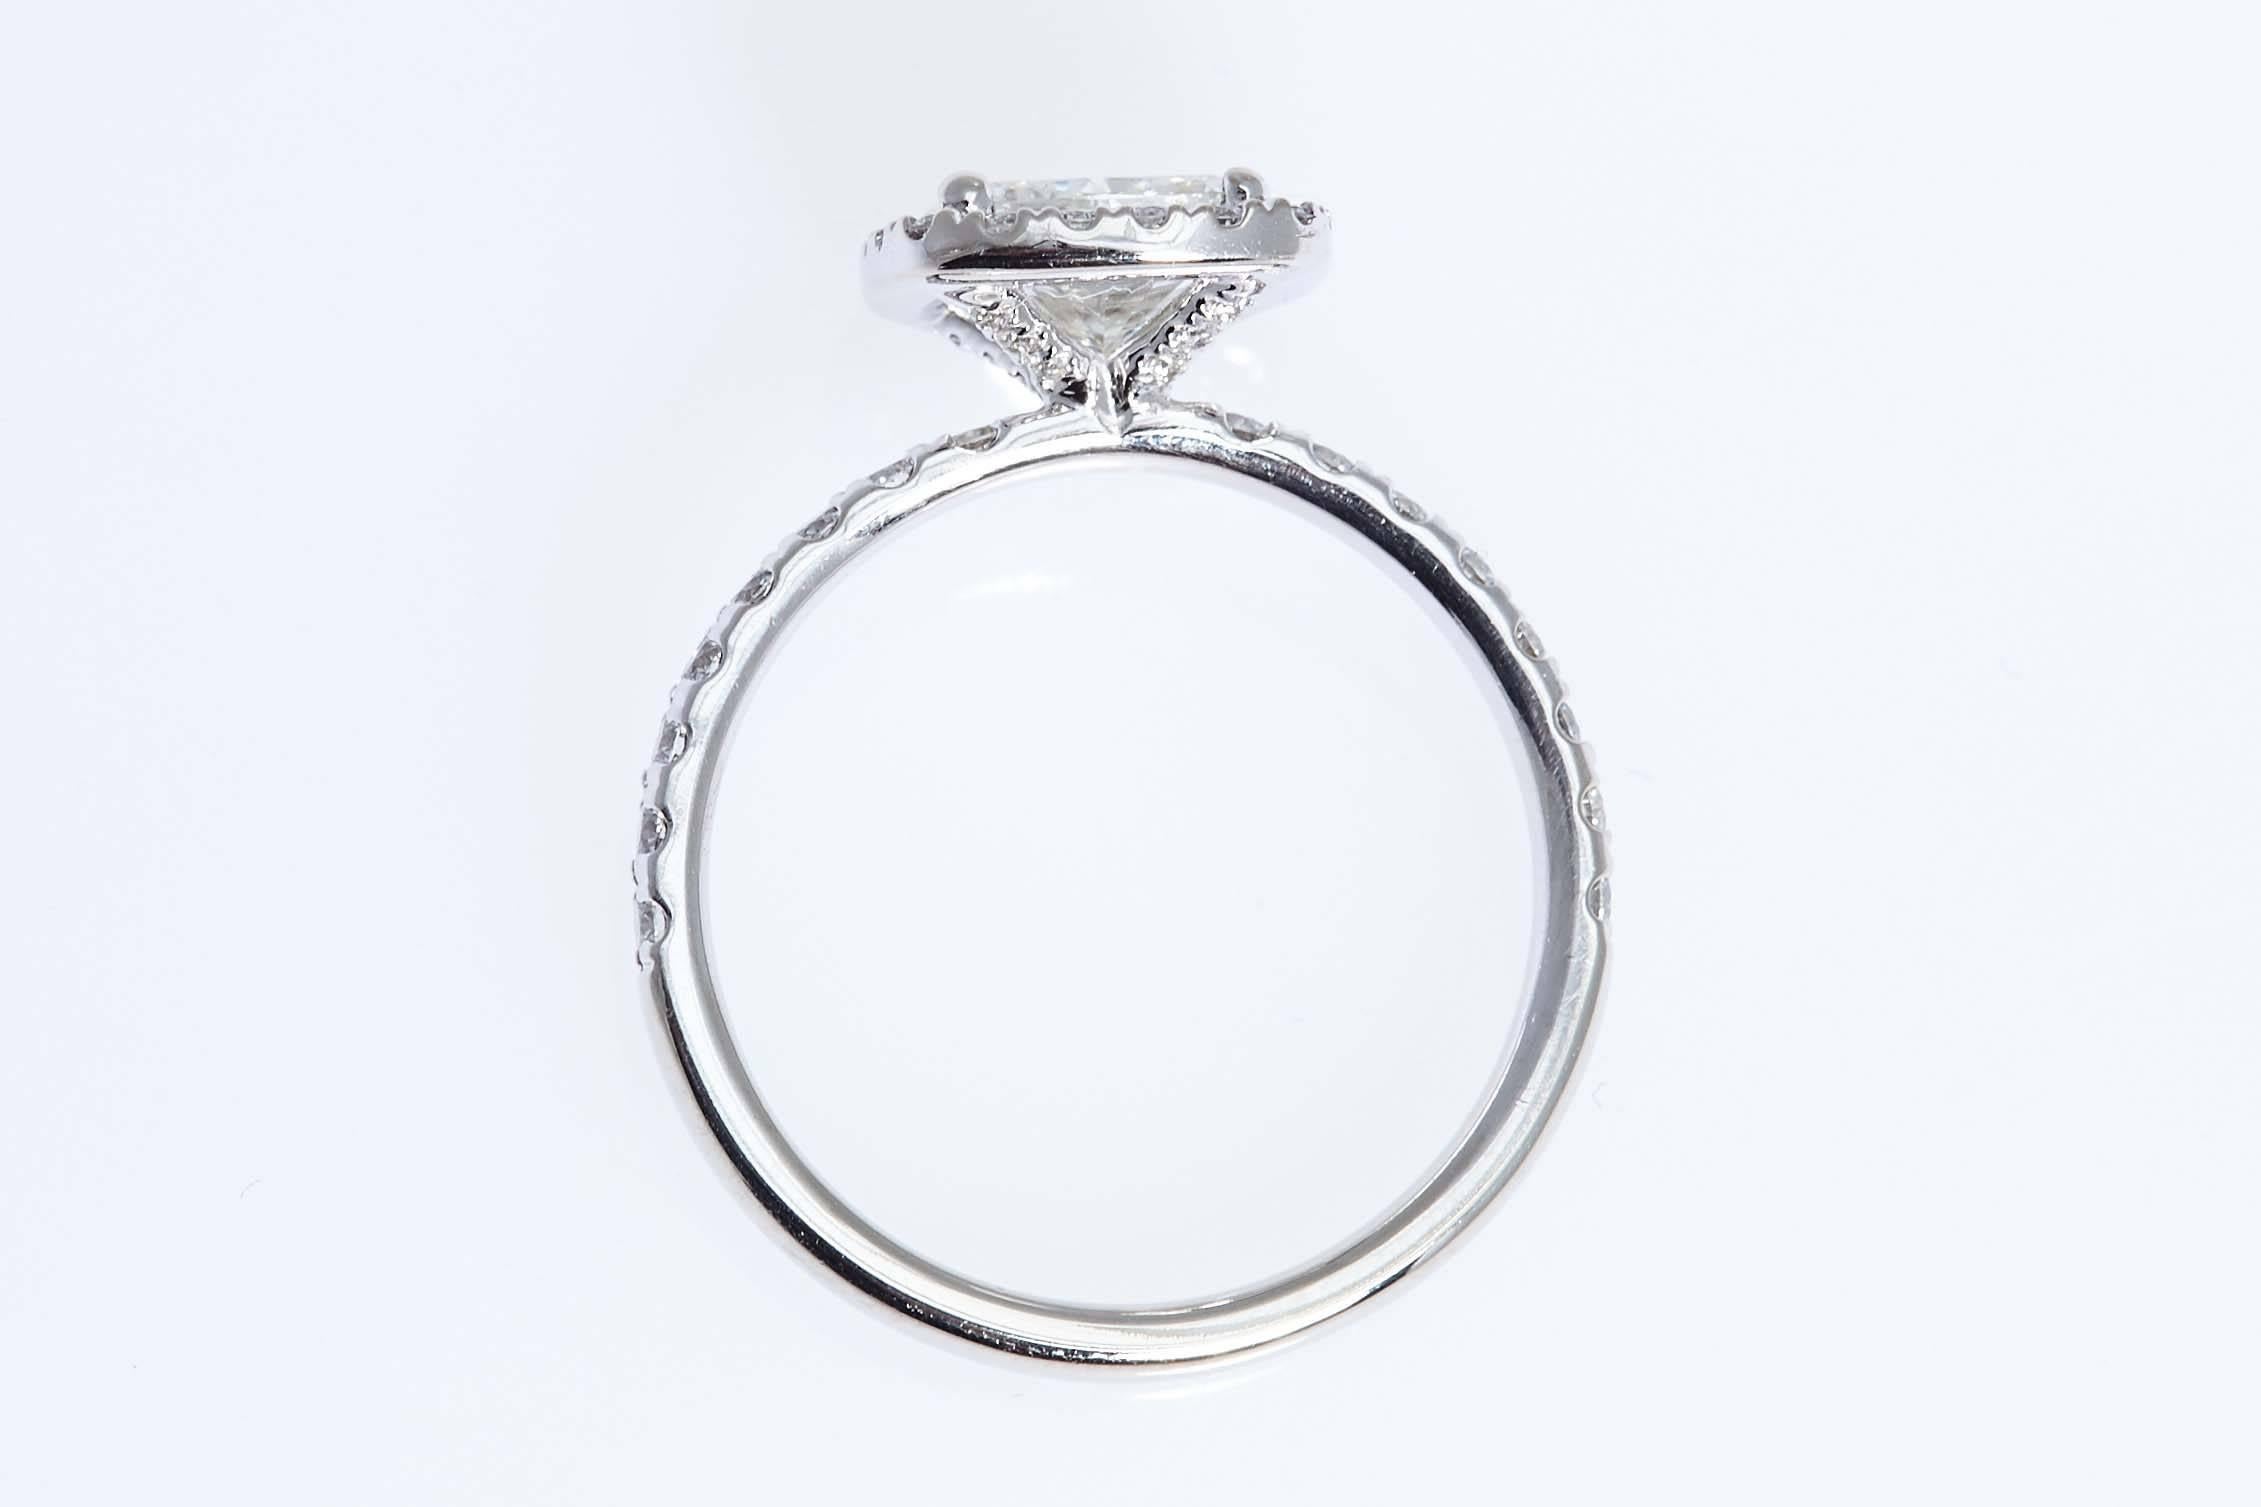 Cushion shaped diamond weighing 1.50 carats mounted in a 14 karat white gold ring with twenty round diamonds encircling the center diamond weighing approximately .20 carat and sixteen round diamonds mounted into the shank weighing approximately .24